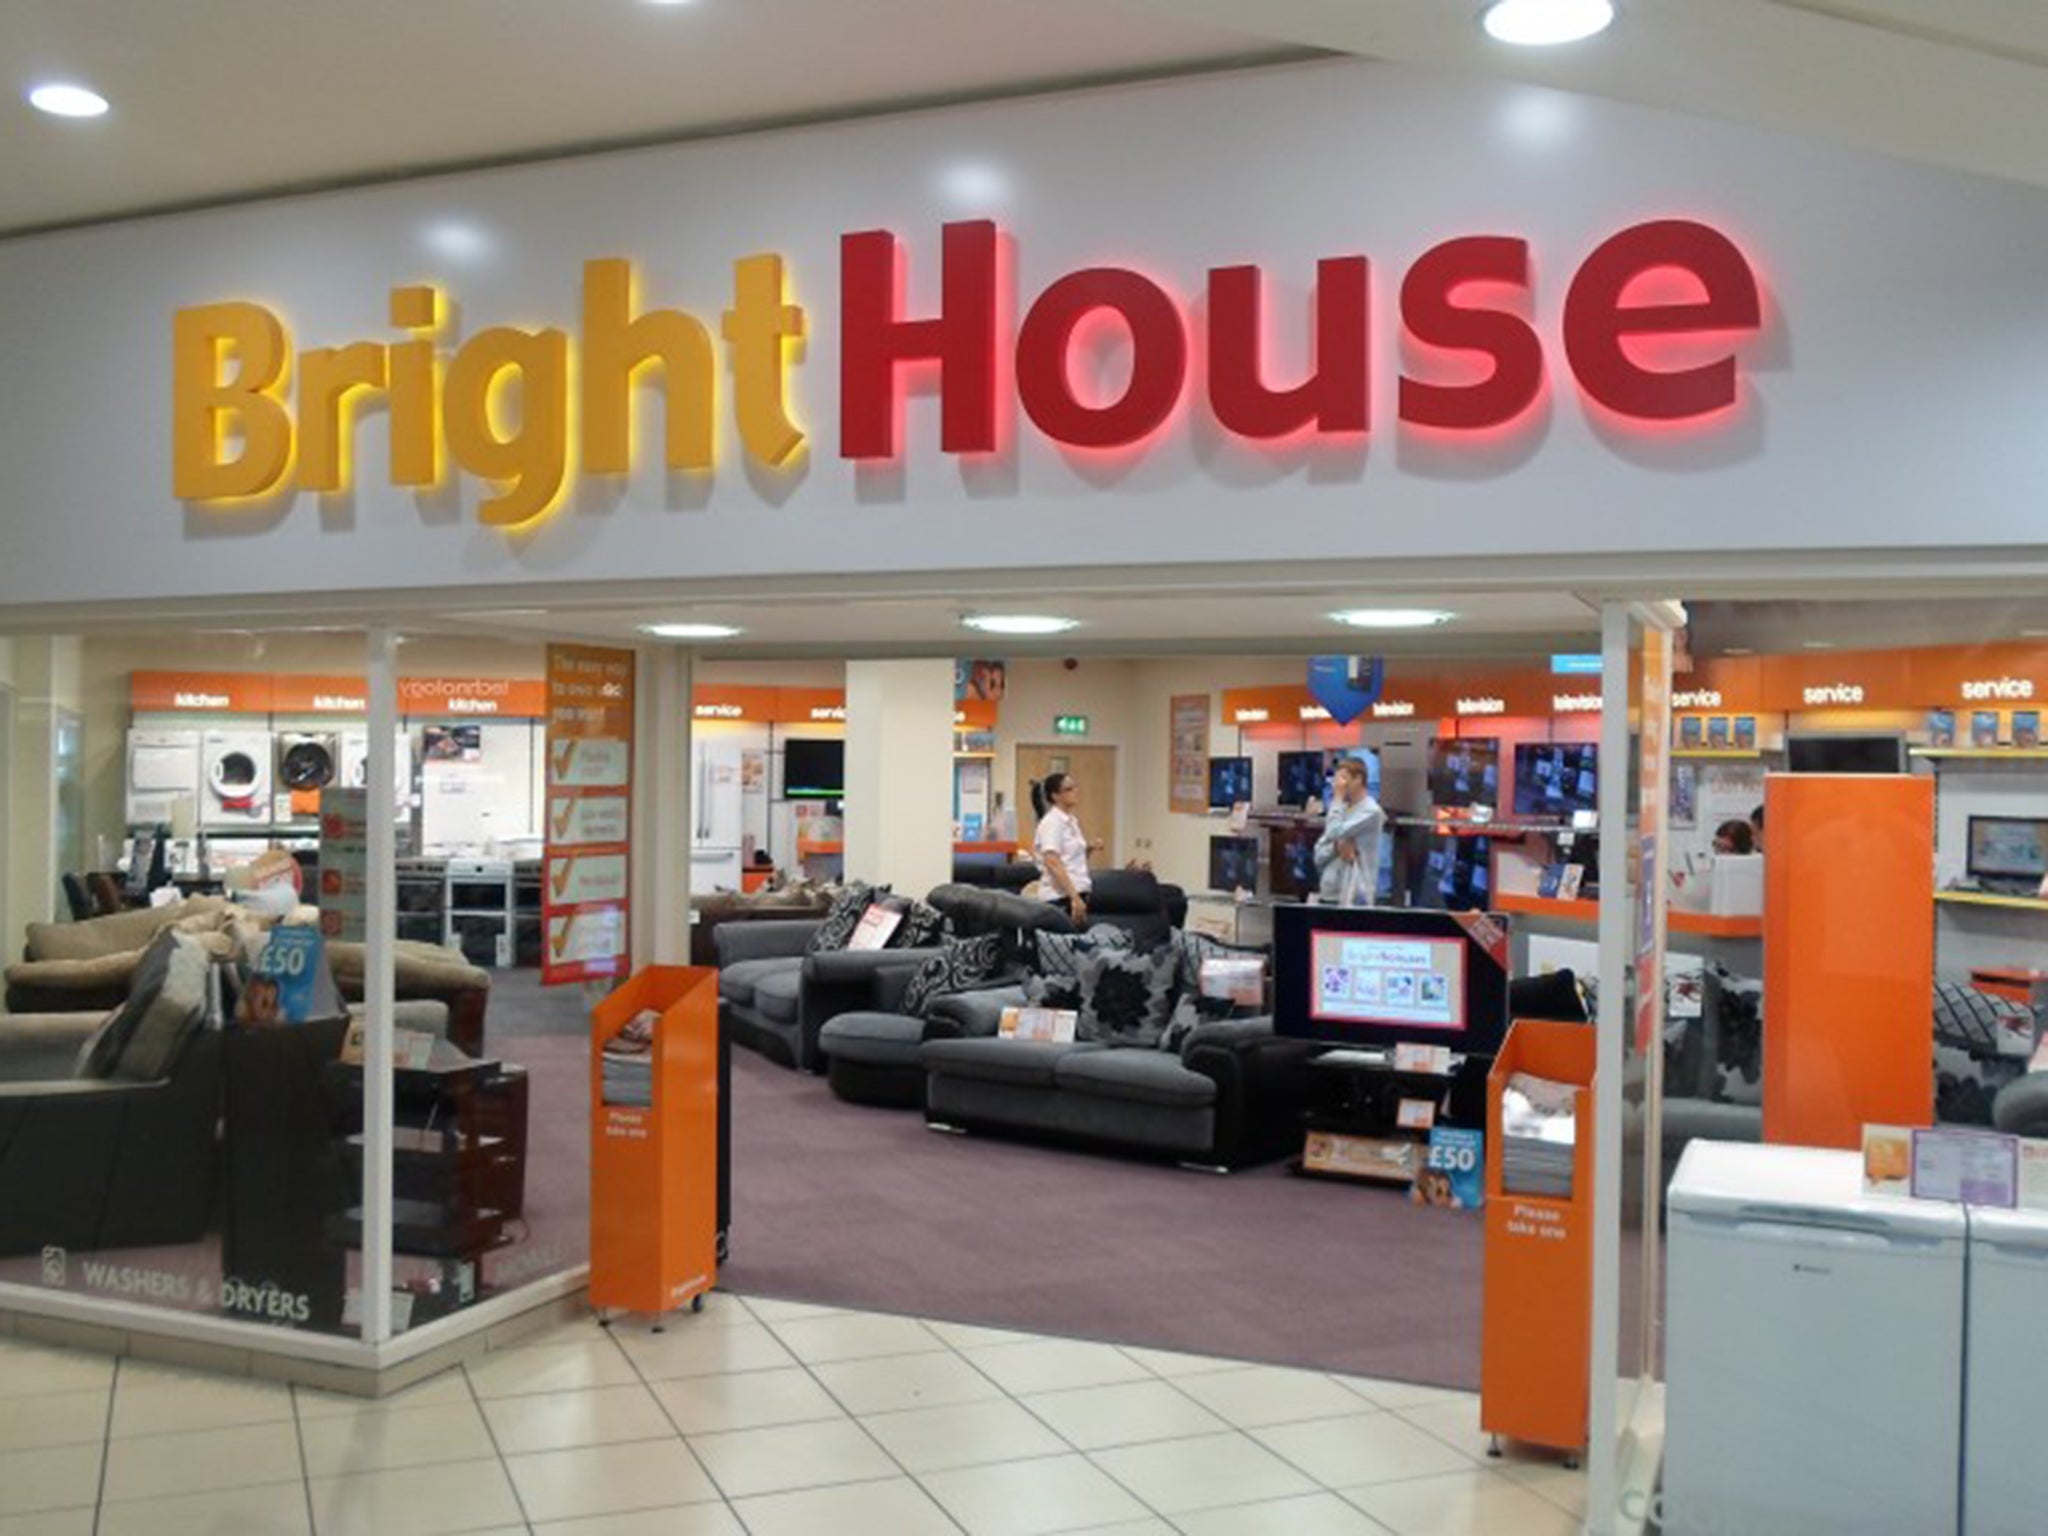 Rent-to-own operators like BrightHouse are having what they can charge capped by the FCA